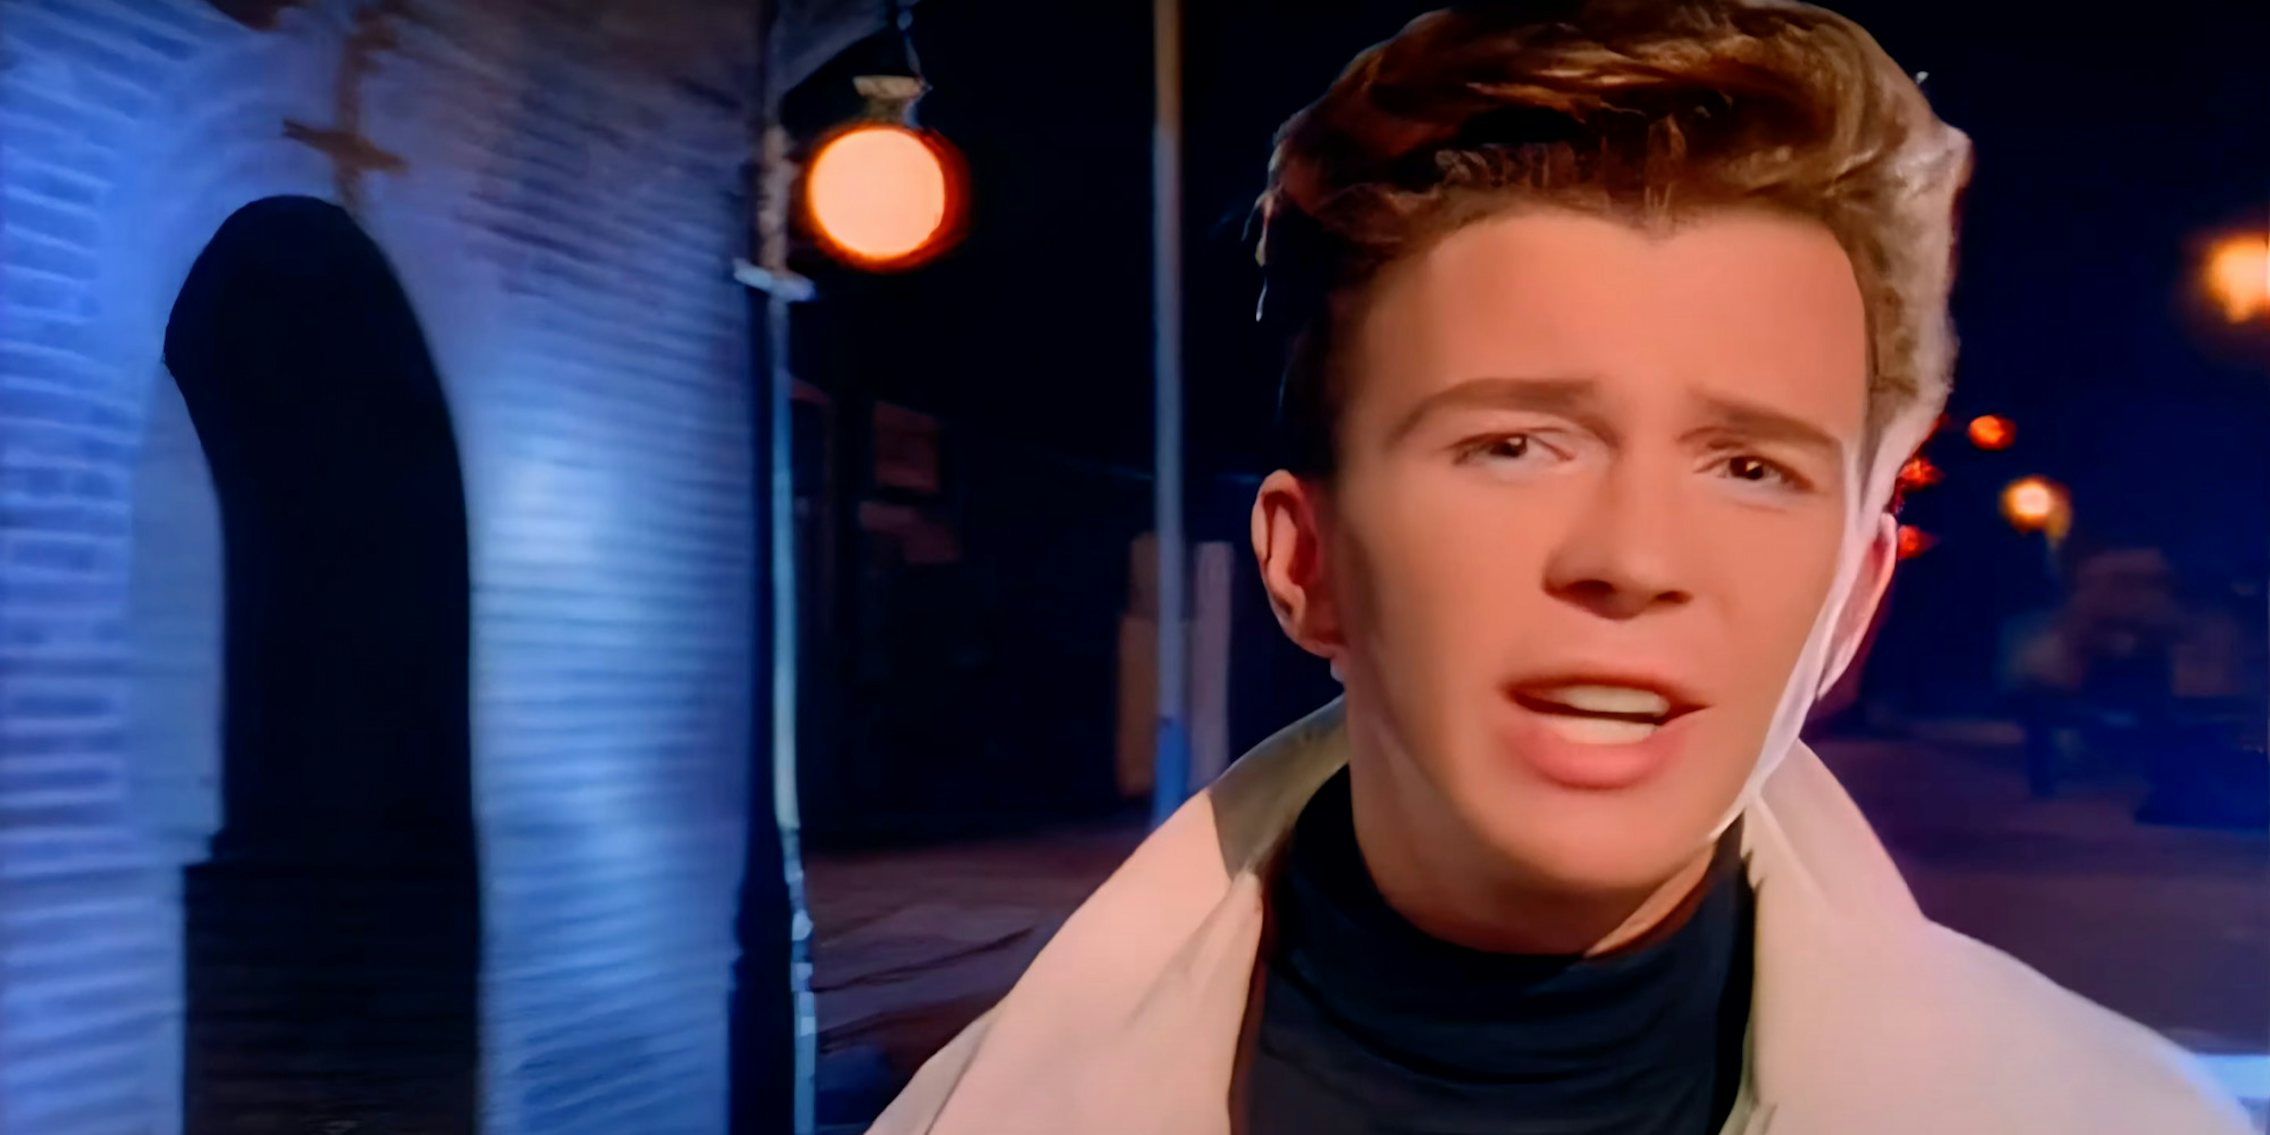 Rick Astley's Remastered 'Never Gonna Give You Up' Video